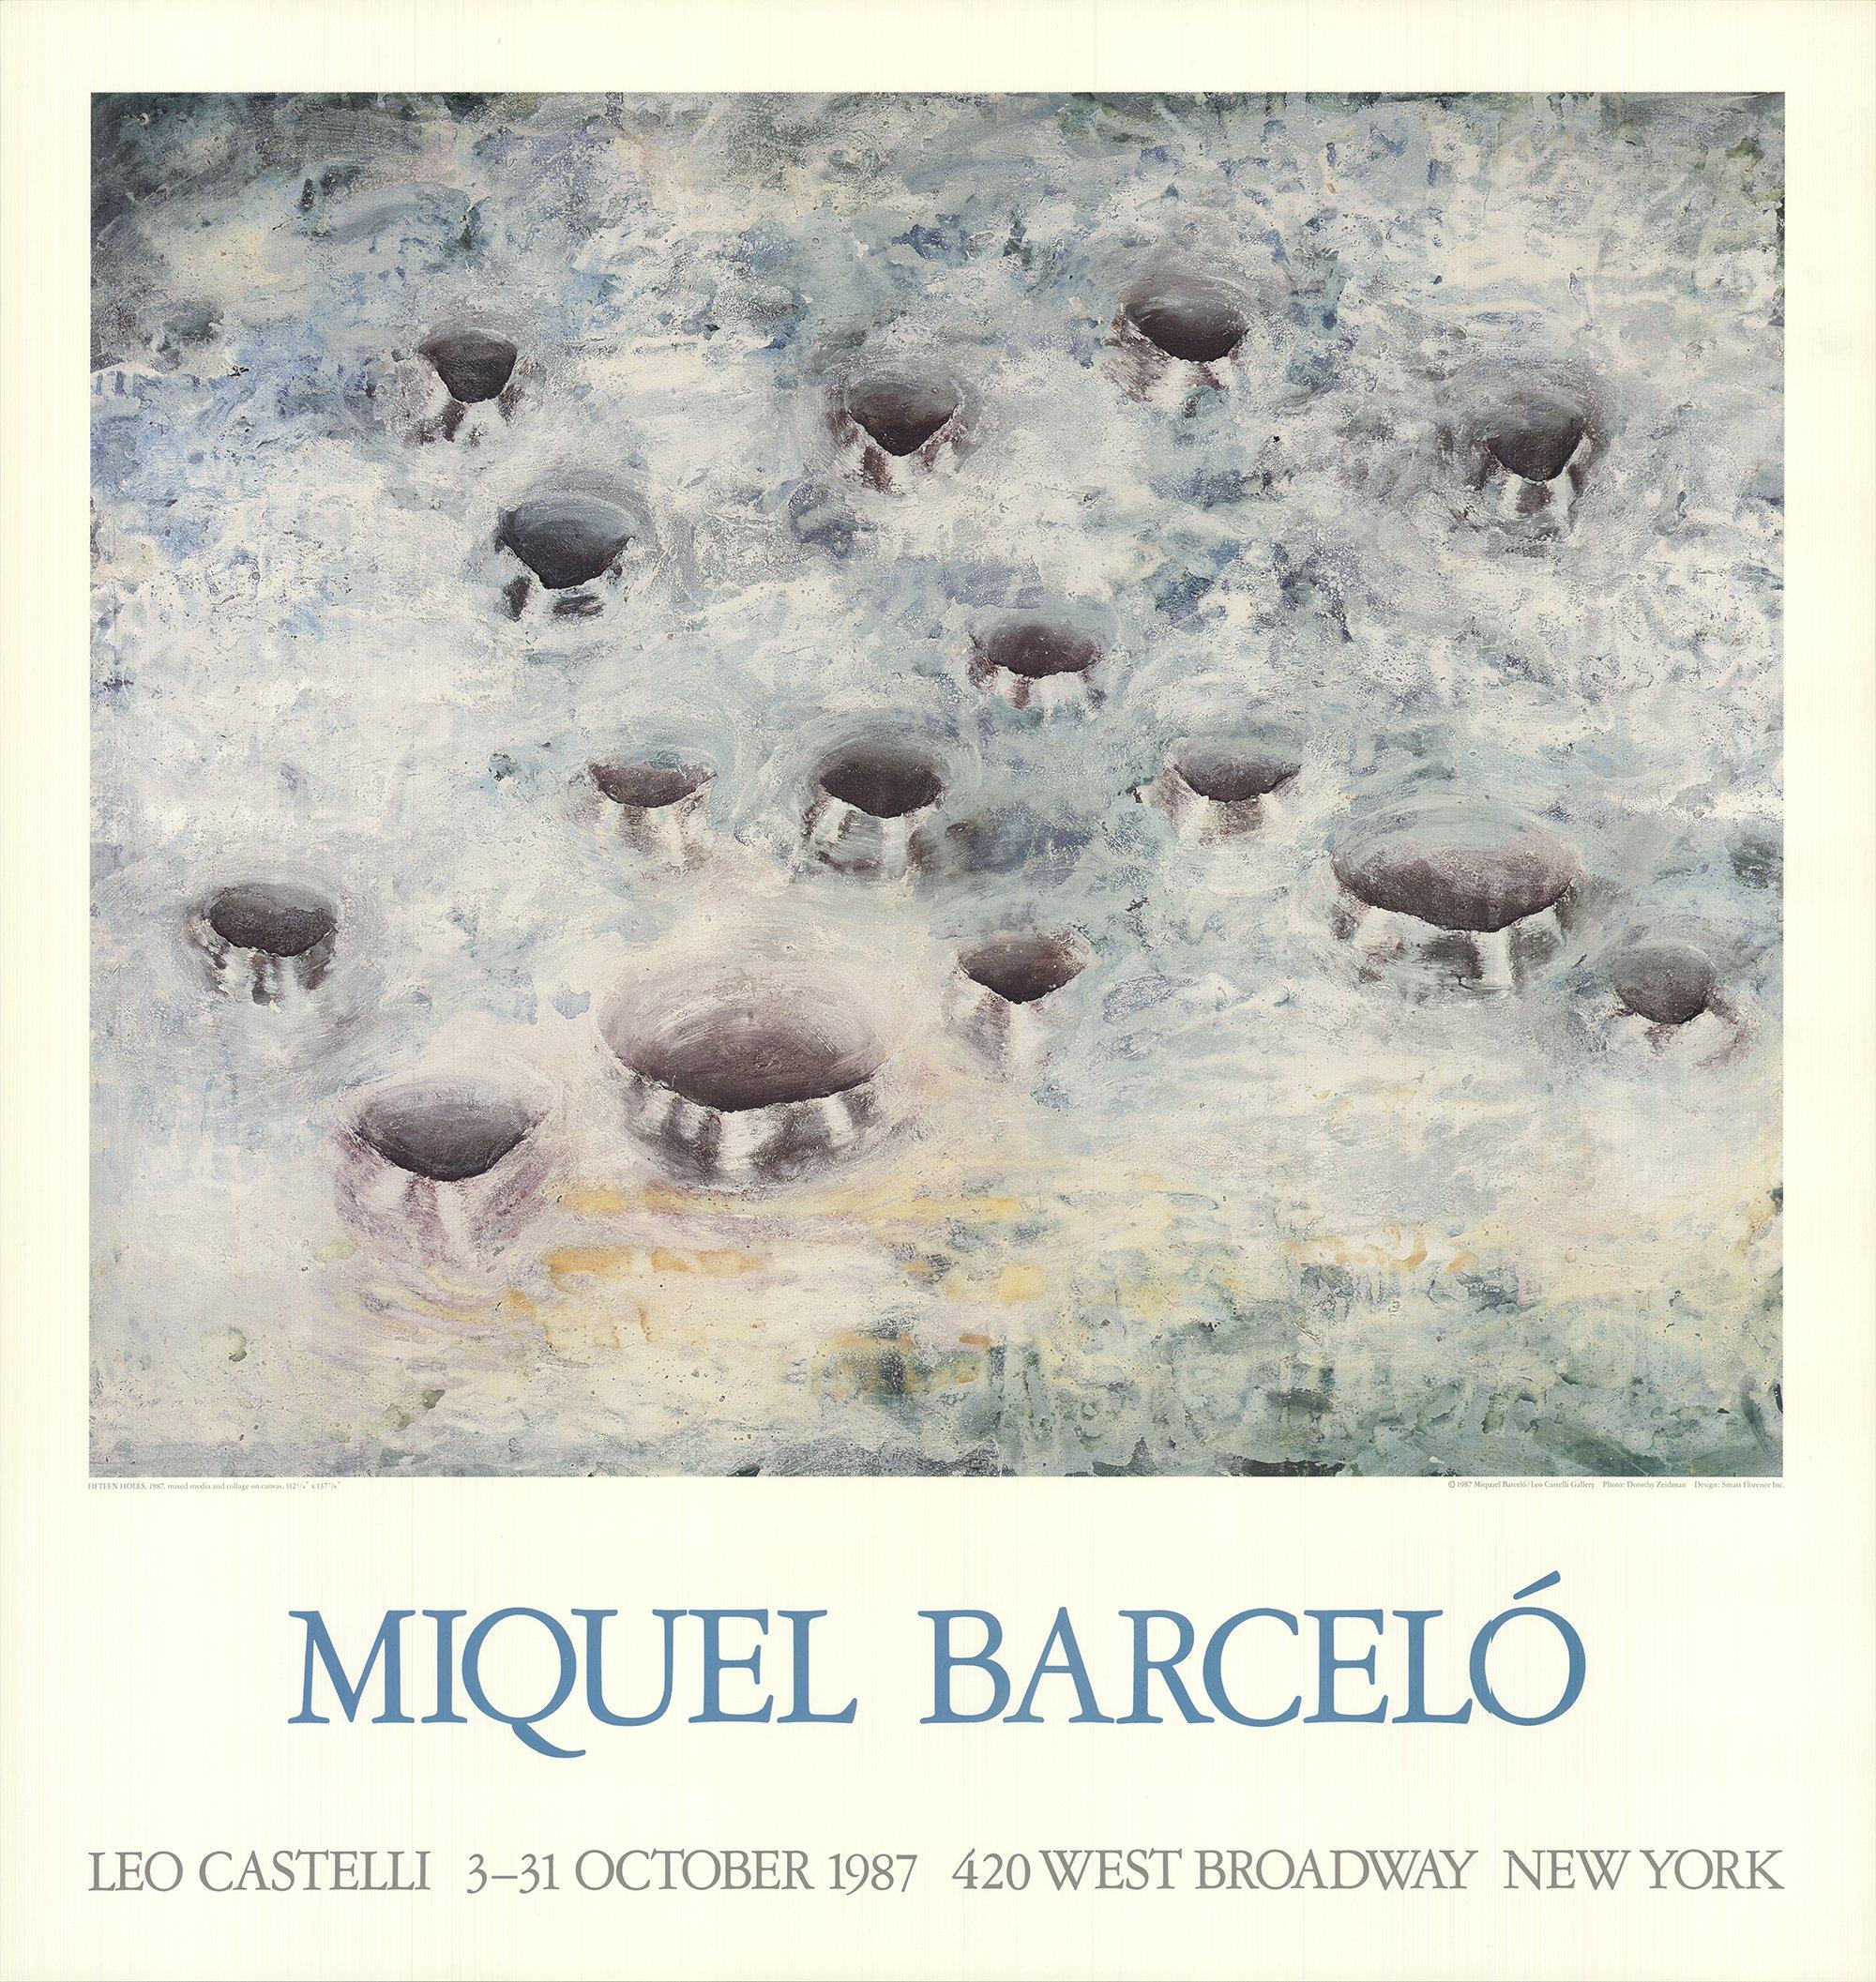 1987 After Miguel Barcelo 'Fifteen Holes'  - Print by Barcelo, Miguel